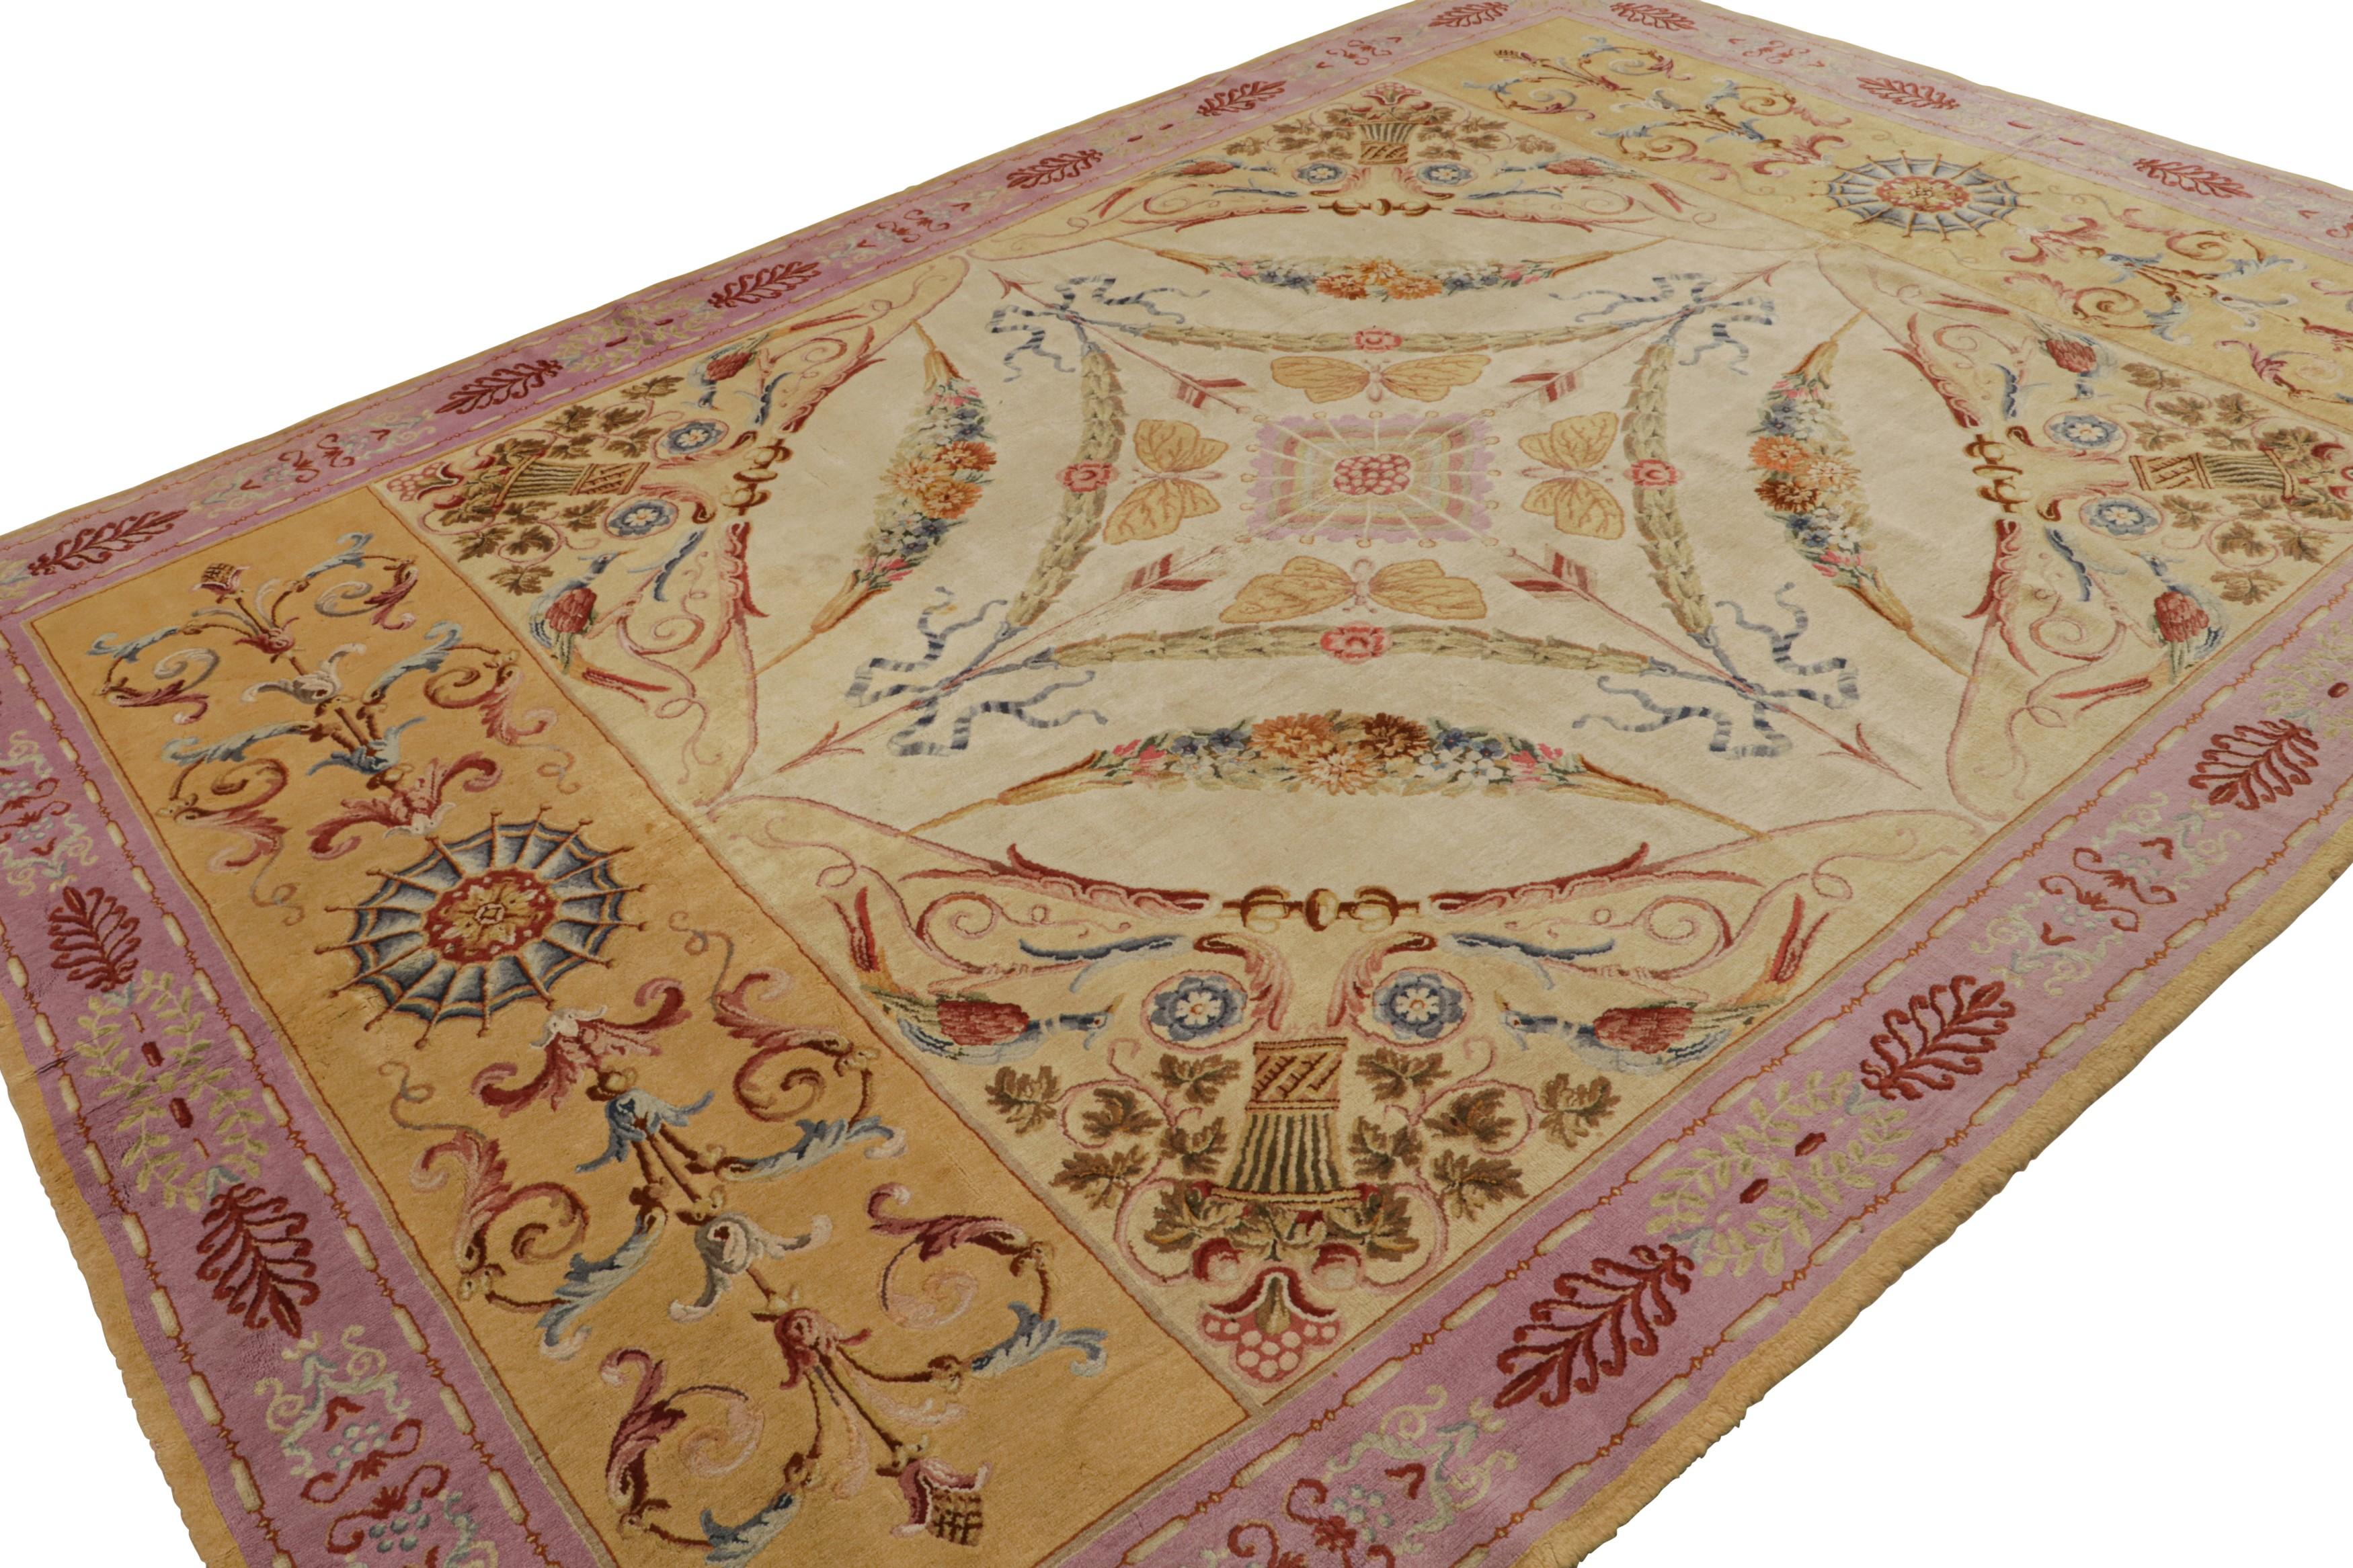 This 10x13 antique French Savonnerie rug is a rare masterpiece from our European rug collection. Hand knotted in wool circa 1850-1860, its design enjoys floral patterns of an elegant feminine sensibility and wide range of colors. 

On the design: